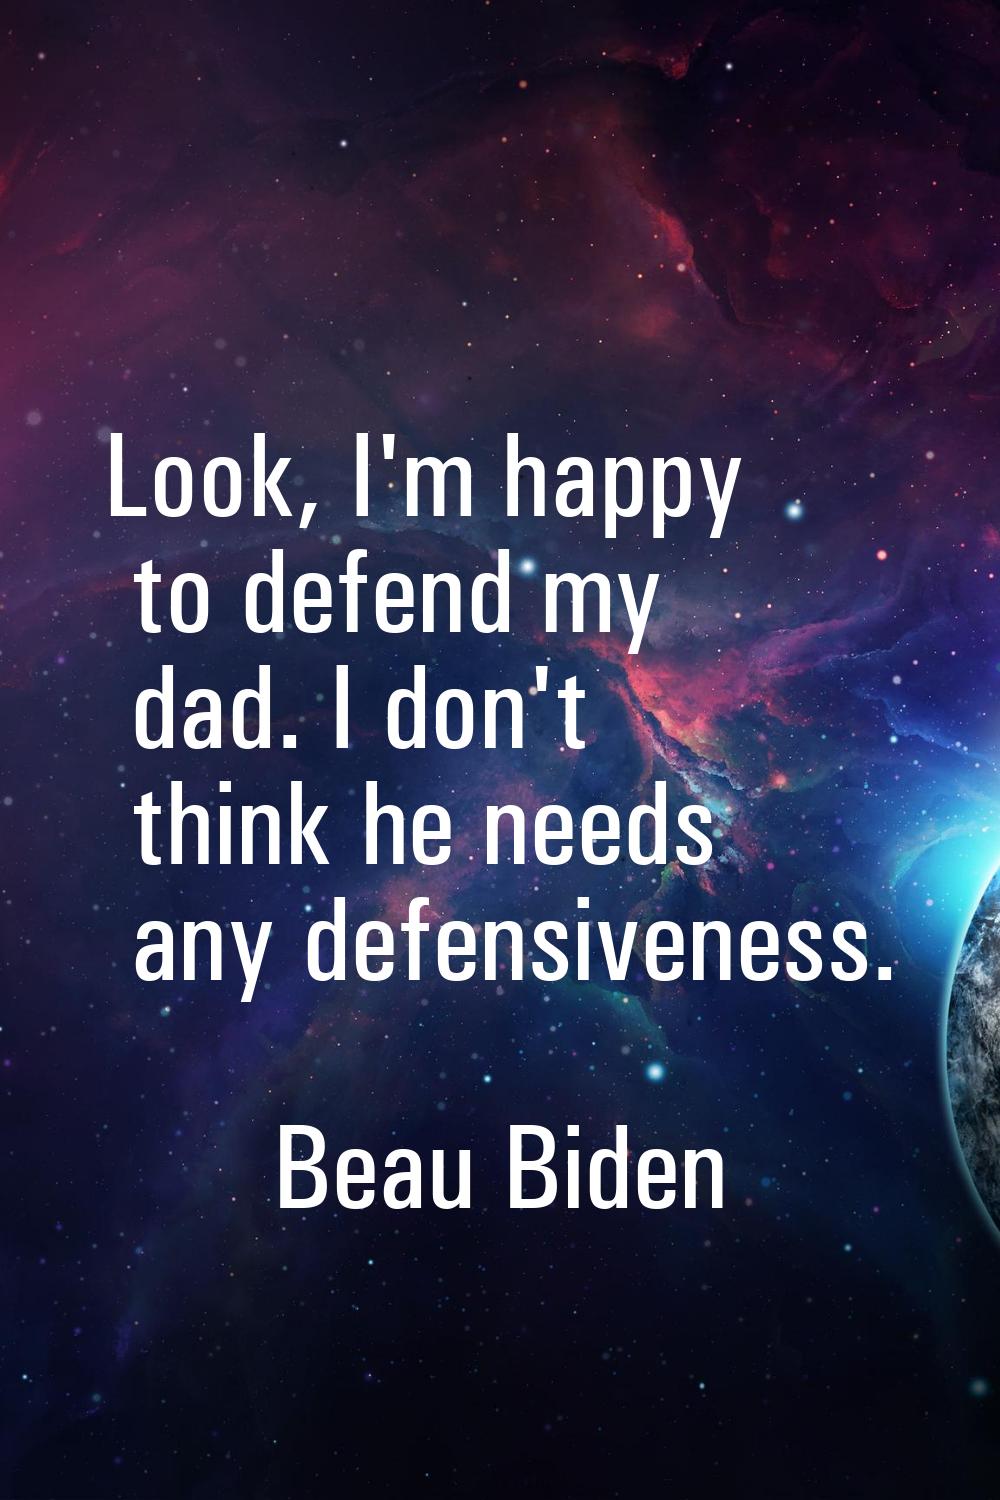 Look, I'm happy to defend my dad. I don't think he needs any defensiveness.